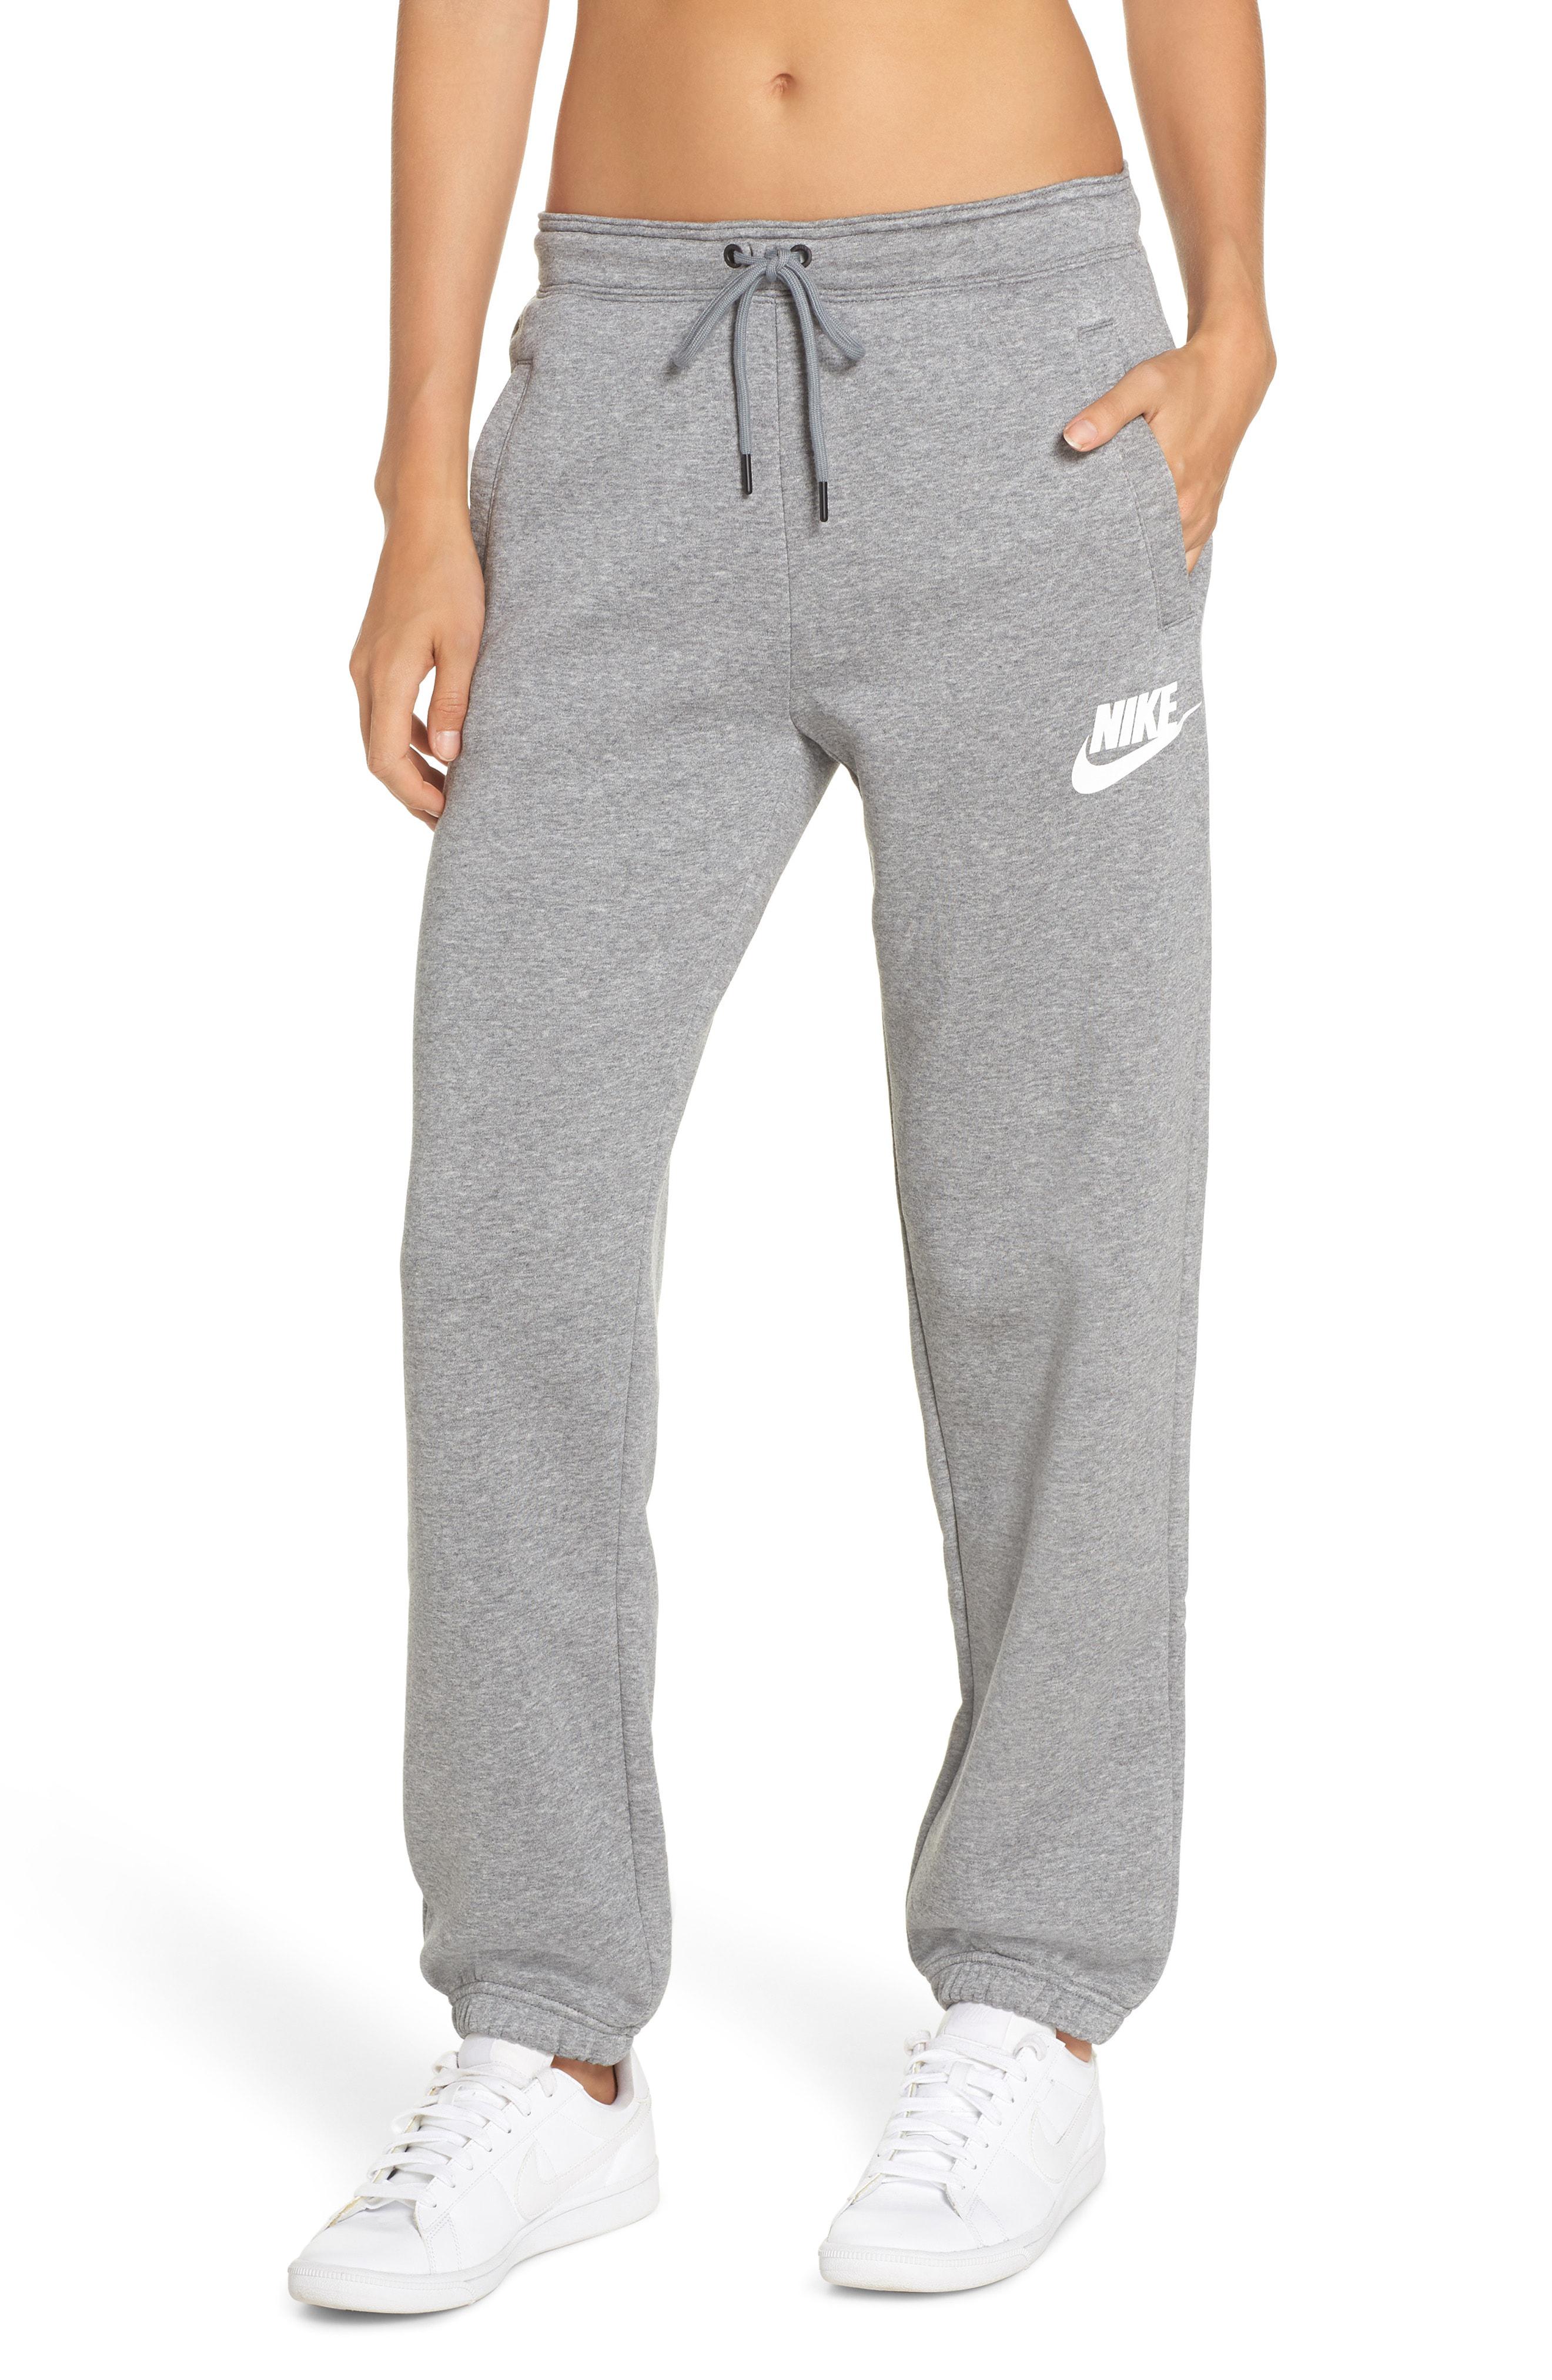 Nike Nsw Rally Pants in Carbon Heather/ Cool Grey (Gray) - Lyst